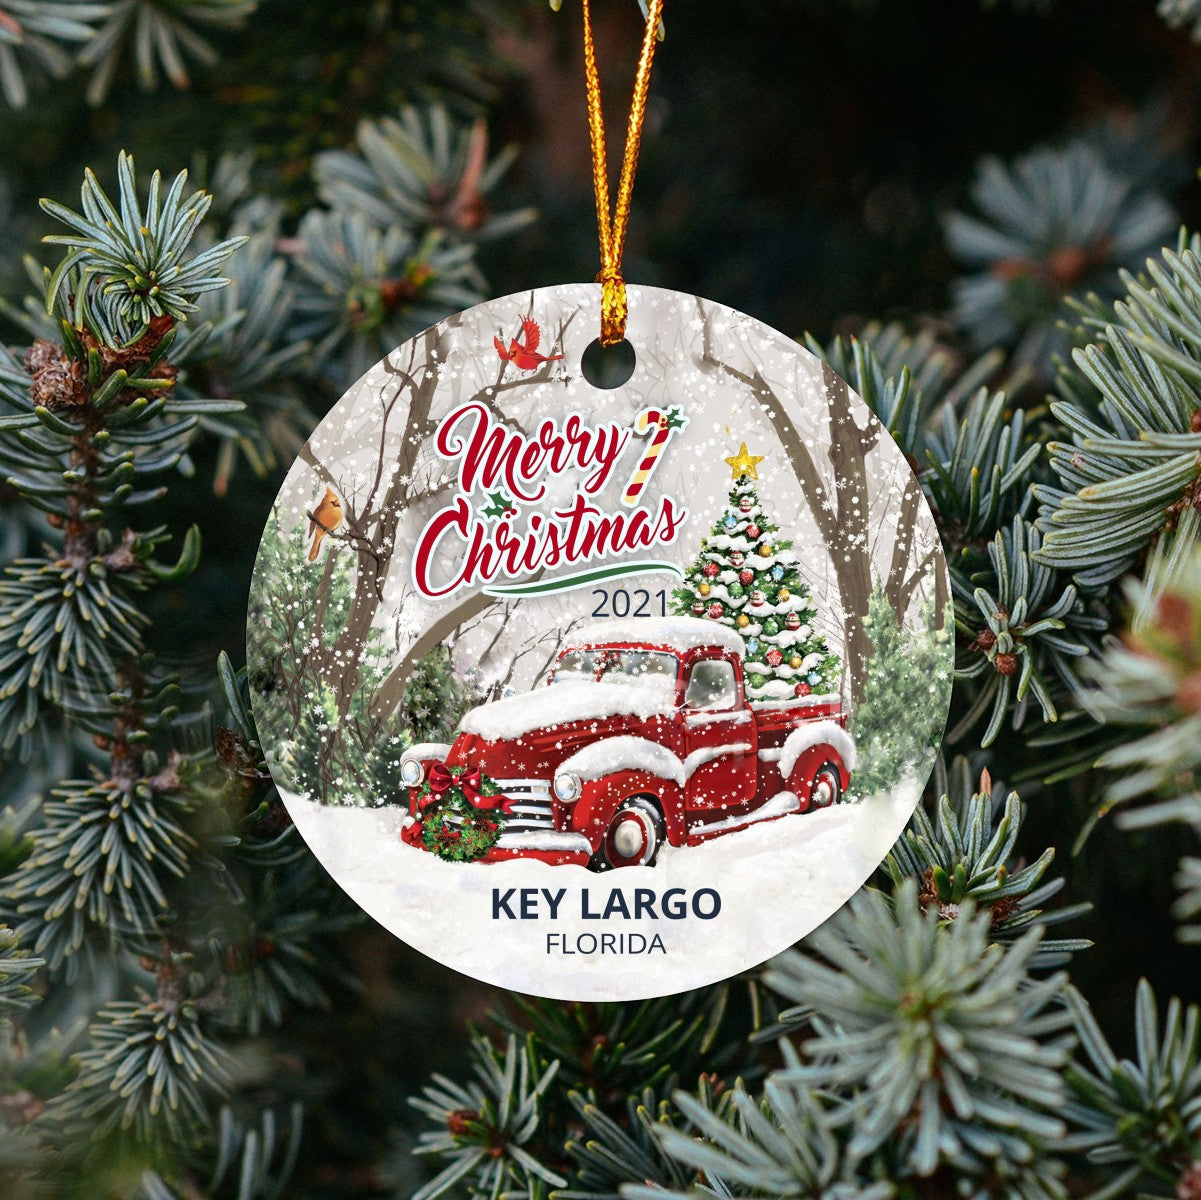 Christmas Tree Ornaments Key Largo - Ornament With Name City, State Key Largo Florida FL Ornament - Red Truck Xmas Ornaments 3'' Plastic Gift For Family, Friend And Housewarming